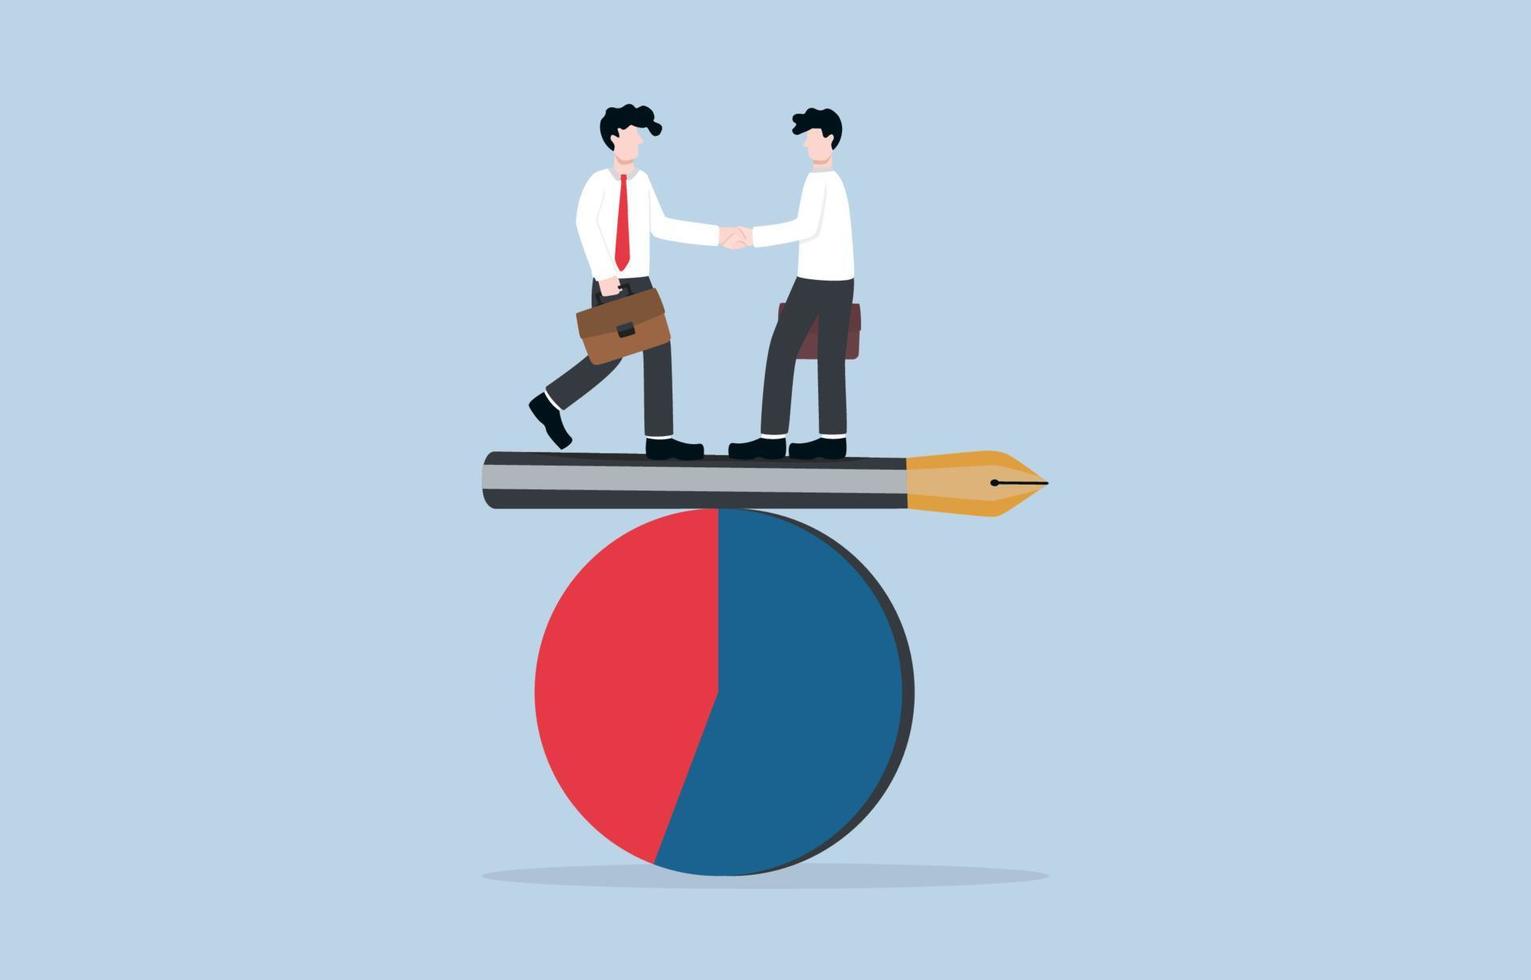 Perfect negotiation of business benefits, investment partnership, sign contract, collaboration or cooperation concept. Entrepreneur businessmen handshaking on signing pen lying on pie chart. vector